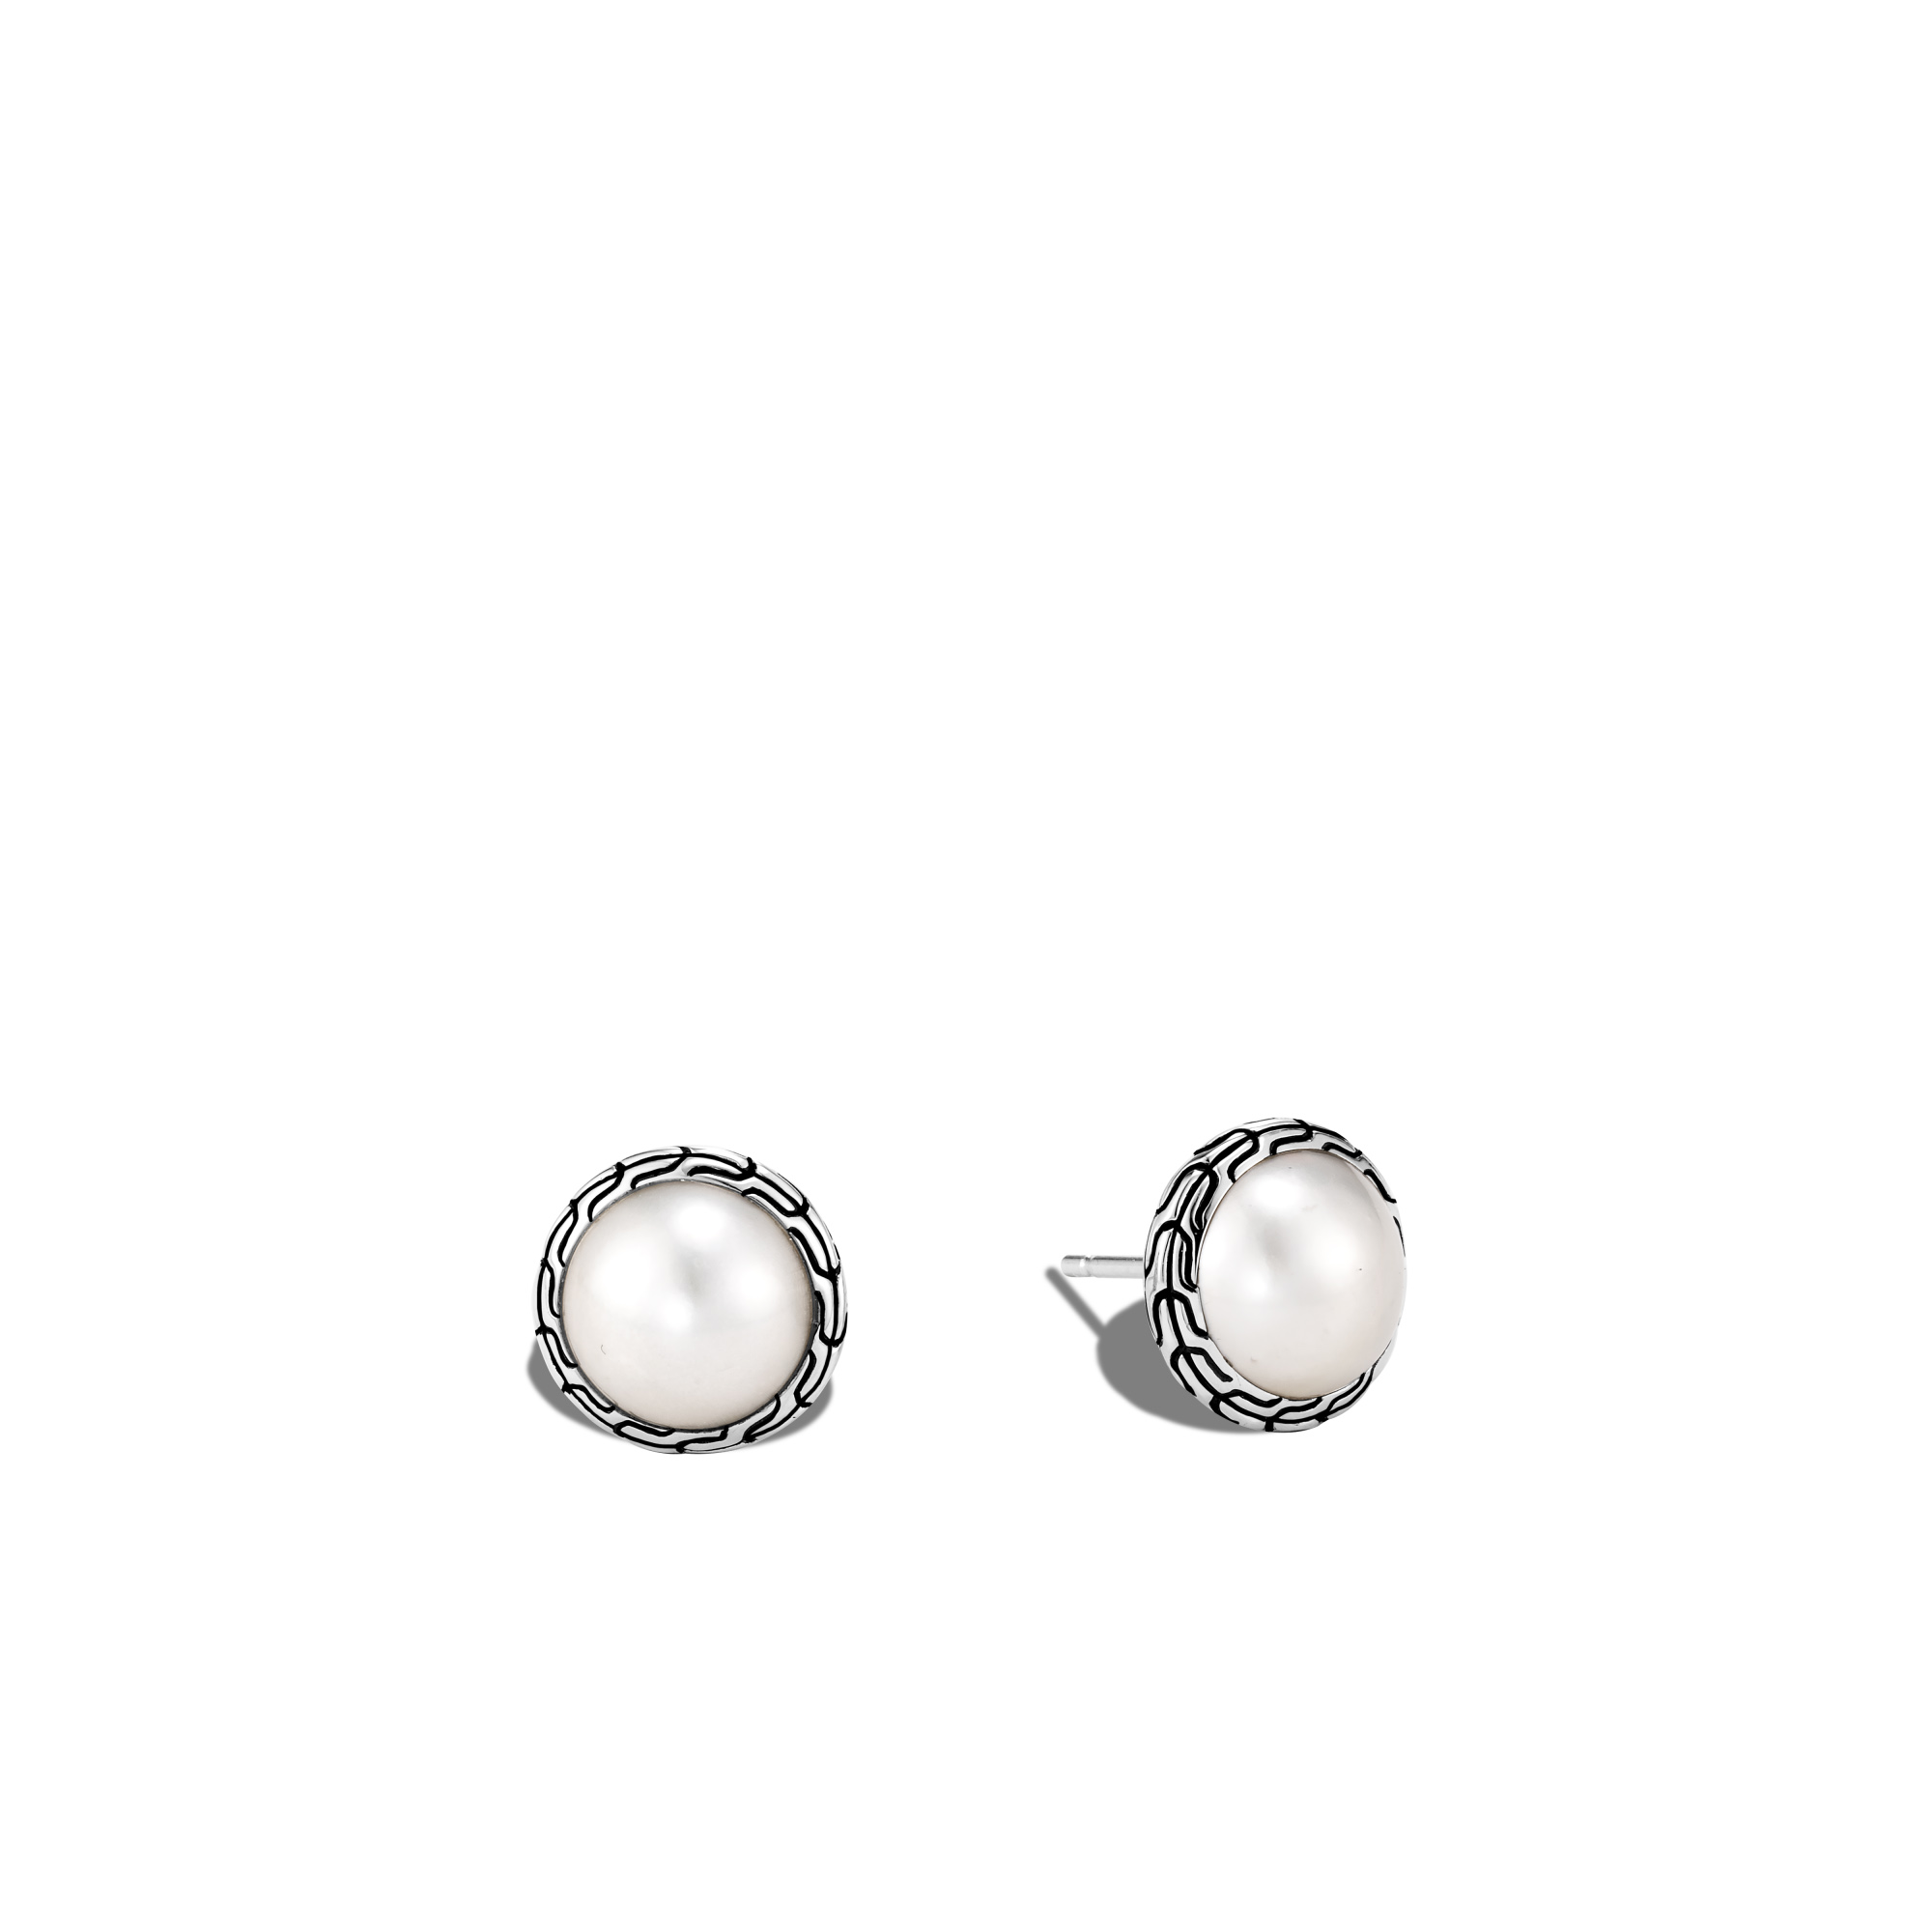 442769Classic-Chain-Stud-Earrings-with-Mabe-Freshwater-Pearl.jpg